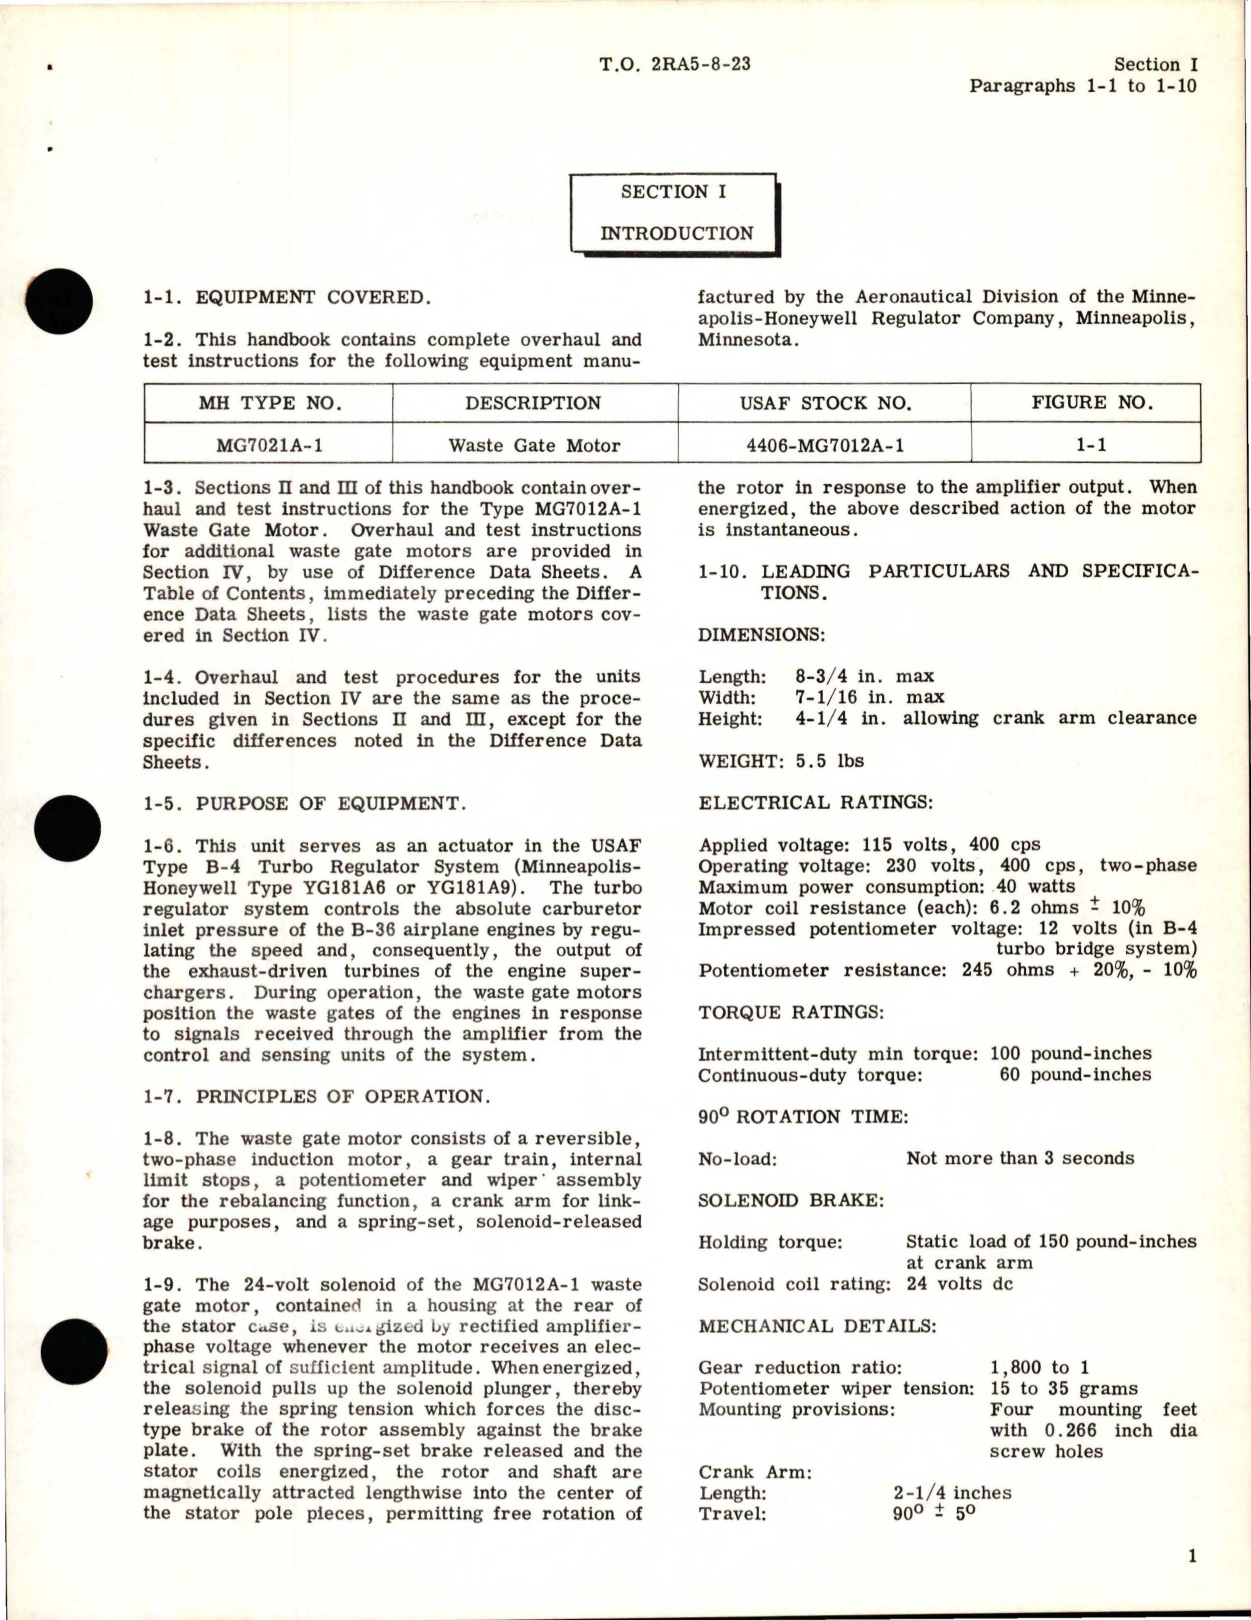 Sample page 5 from AirCorps Library document: Overhaul Instructions for Waste Gate Motors - MG7012A-1 and MG7012C-1